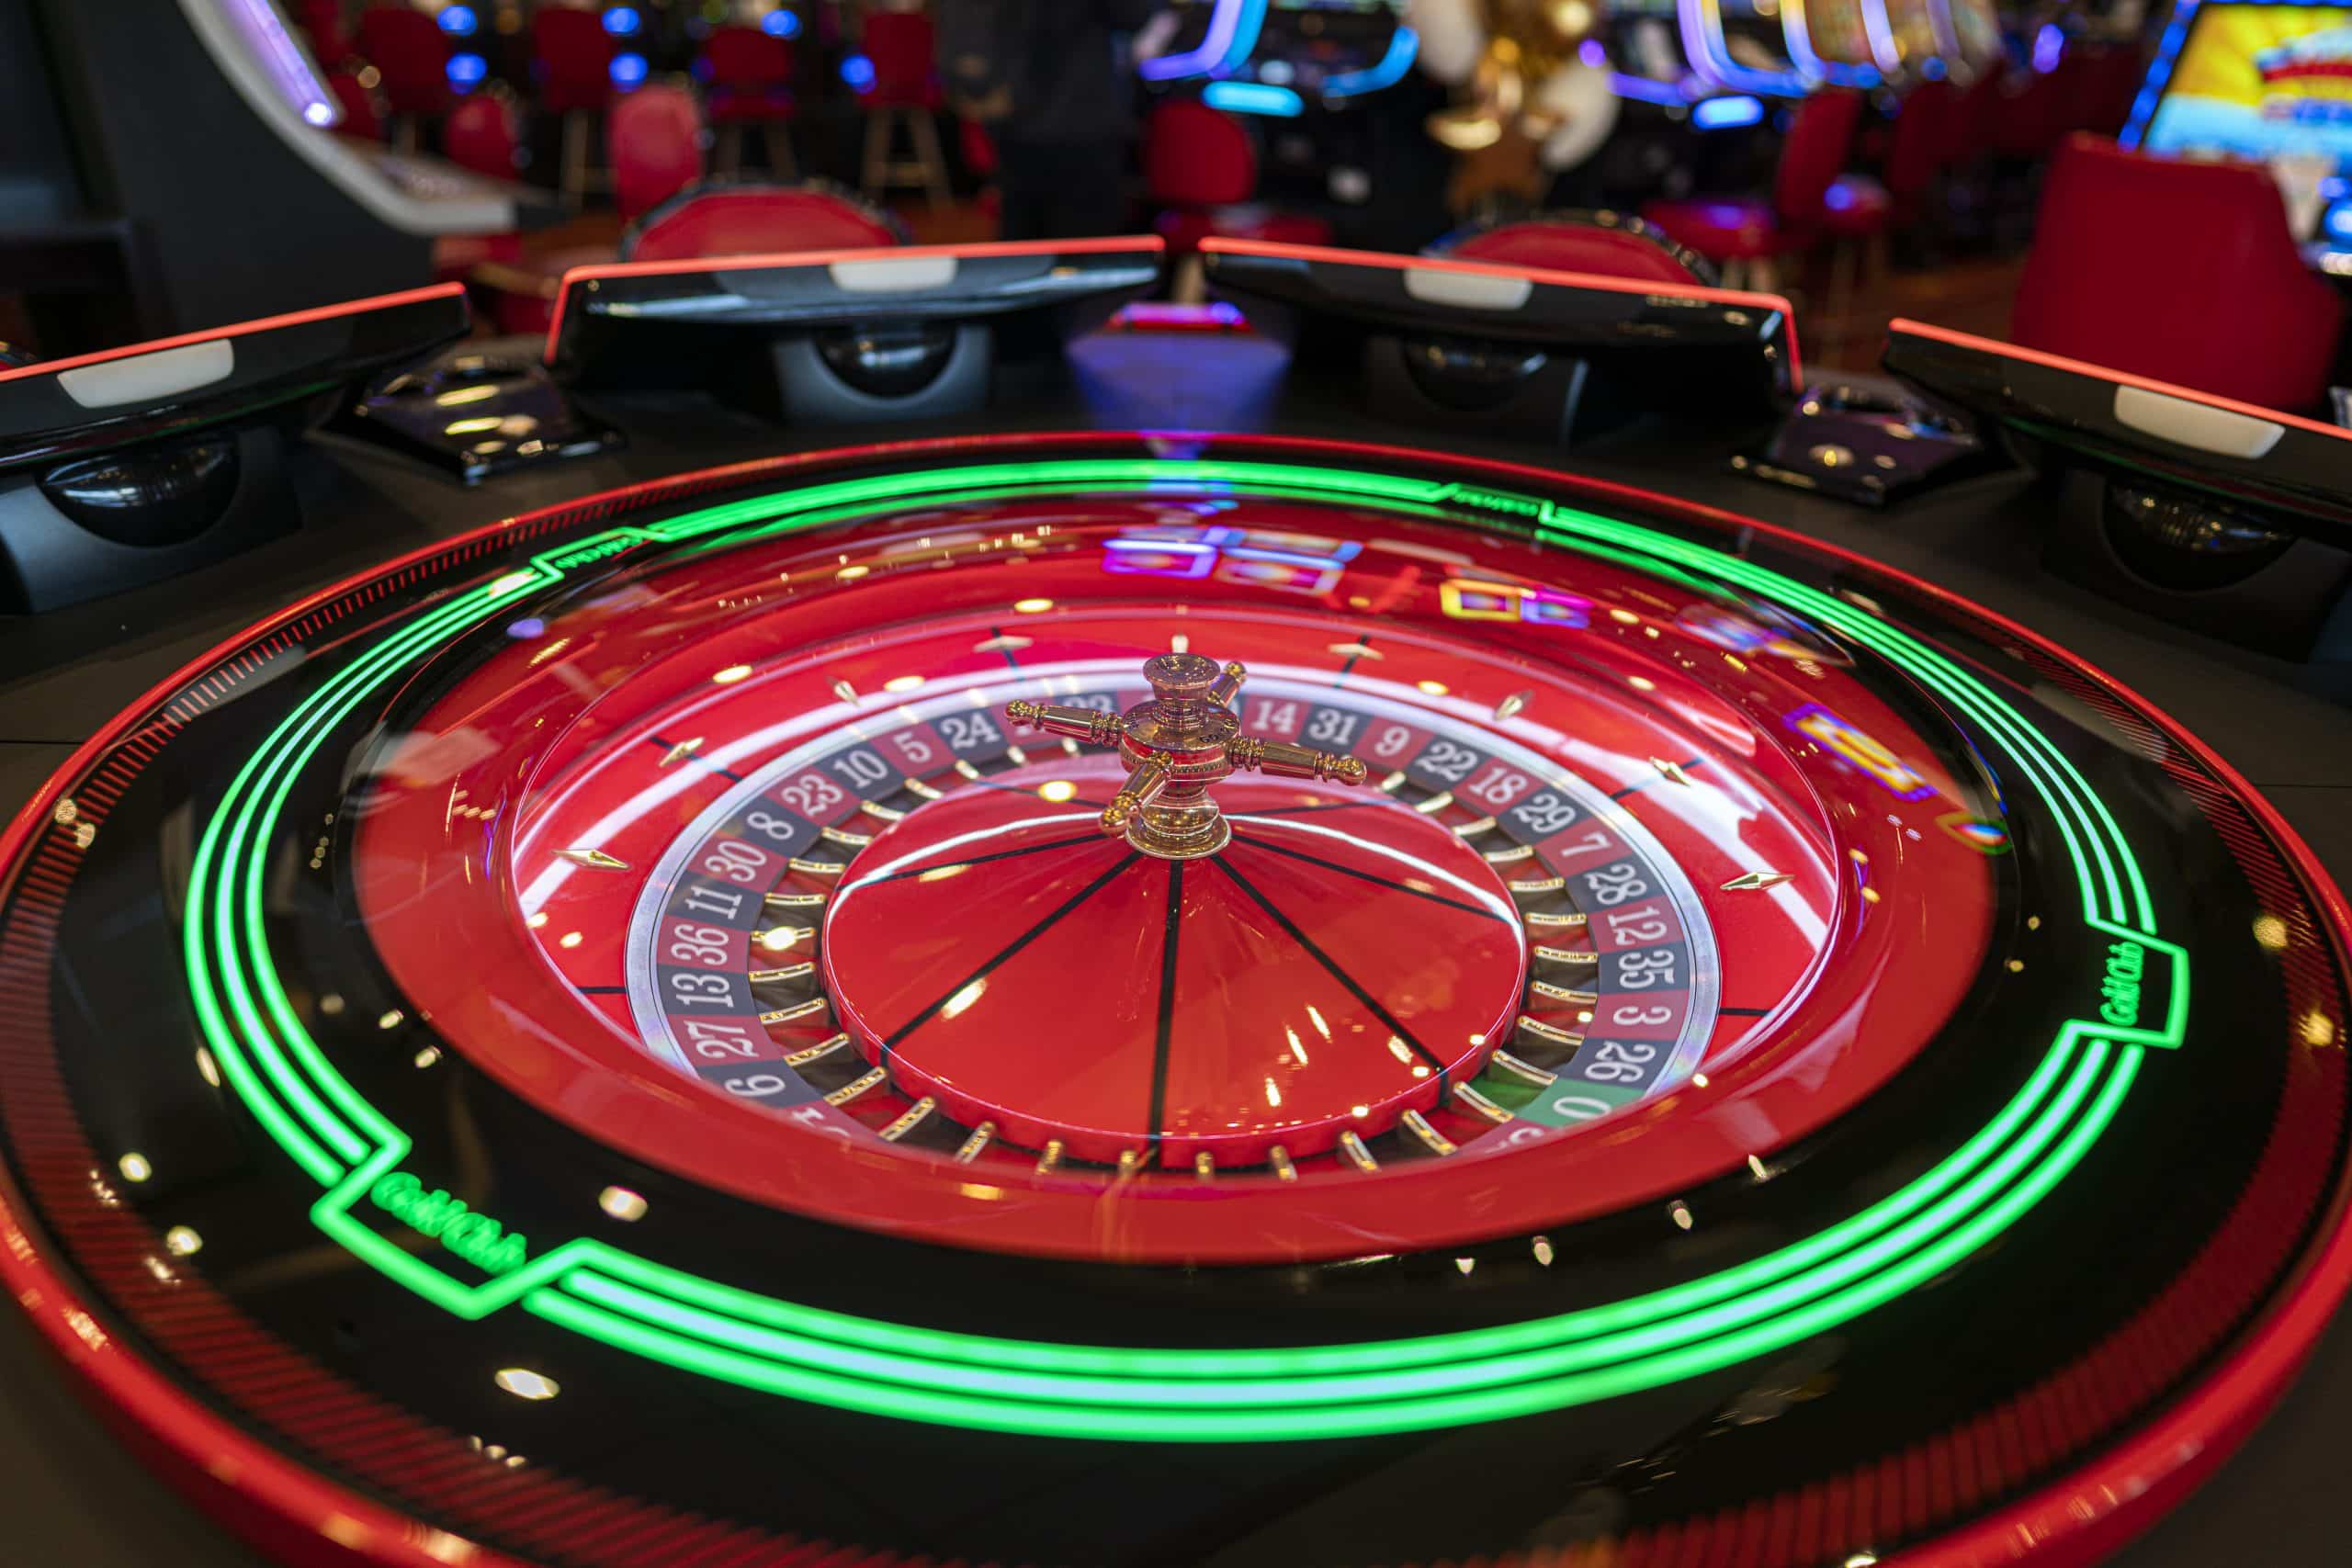 electronic roulette casino gaming table slots roulette casino scaled